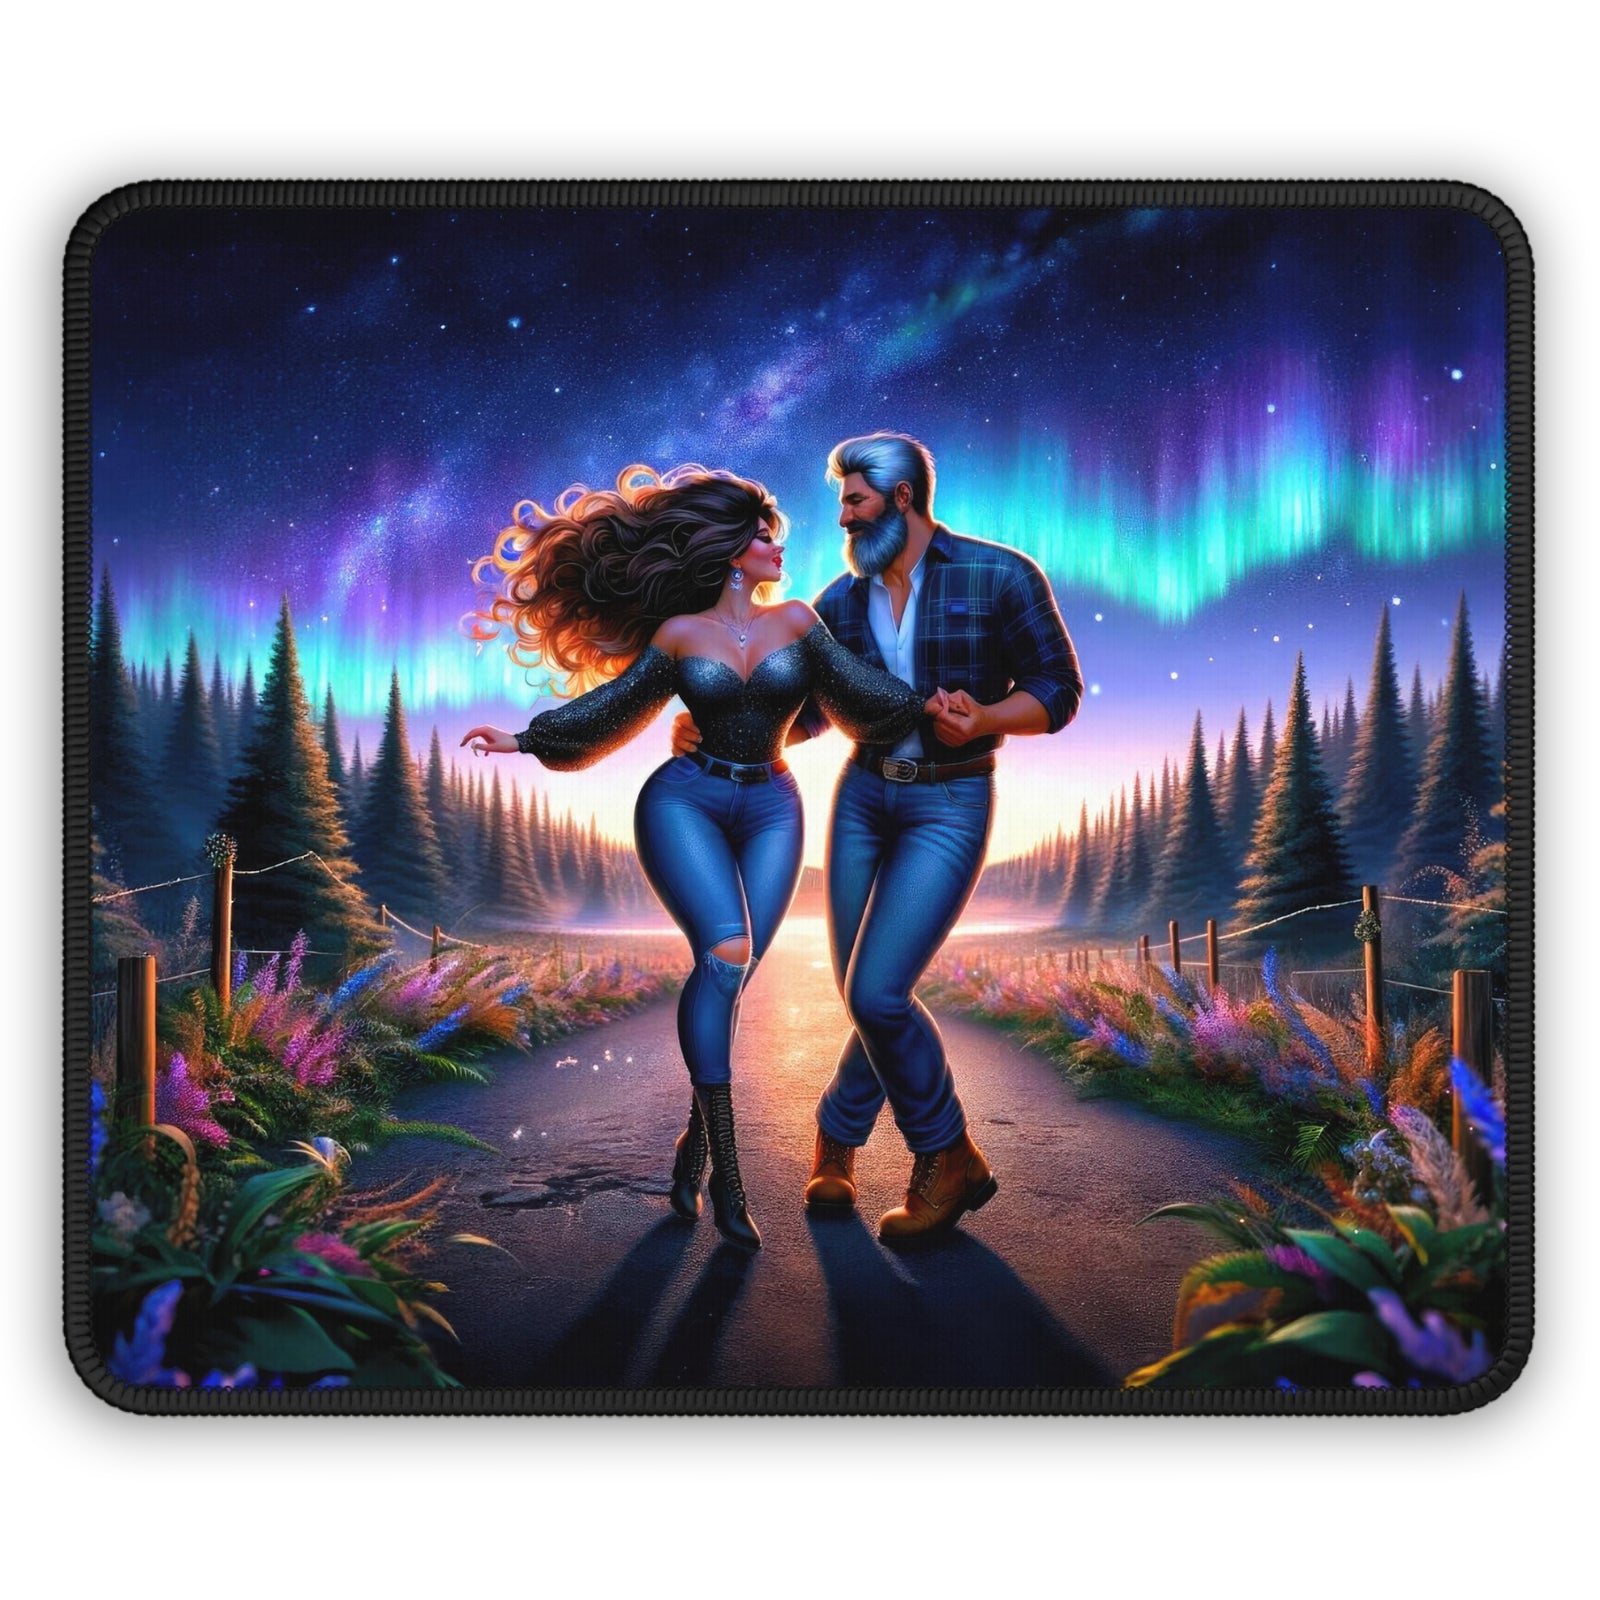 Redneck New Year's Waltz Gaming Mouse Pad